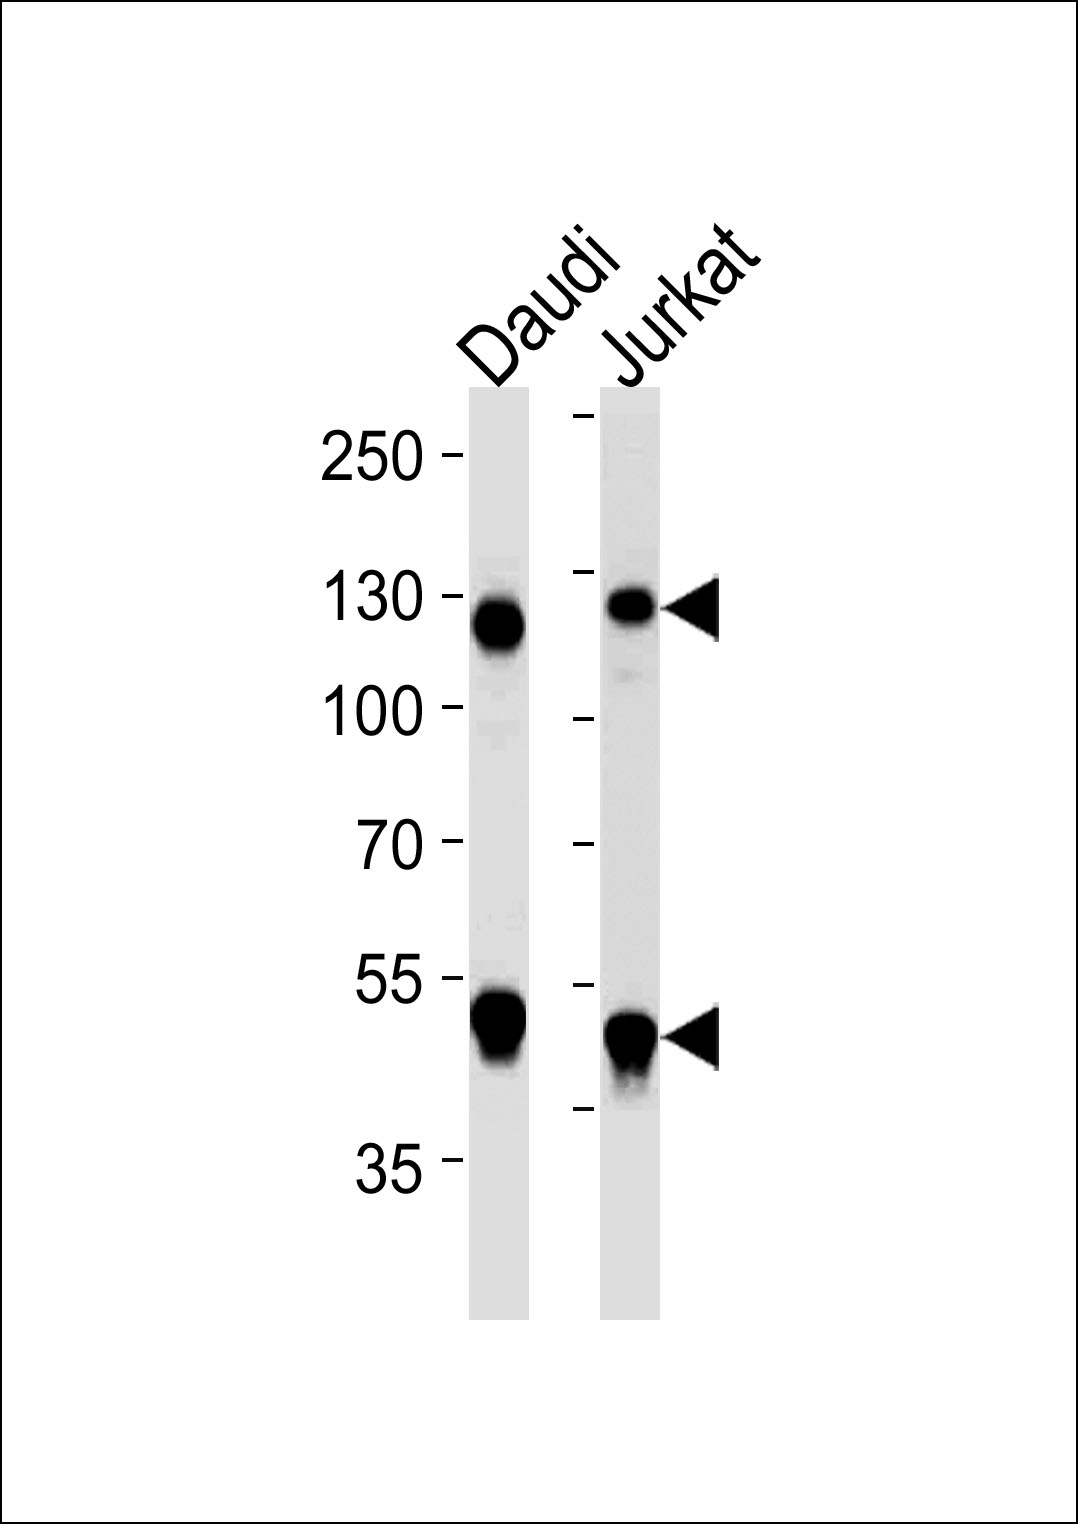 Western blot analysis of lysates from Daudi, Jurkat cell line (from left to right), using NFKB1 Antibody(Cat. #AM2254a). AM2254a was diluted at 1:1000 at each lane. A goat anti-mouse IgG H&L(HRP) at 1:5000 dilution was used as the secondary antibody. Lysates at 35?g per lane.